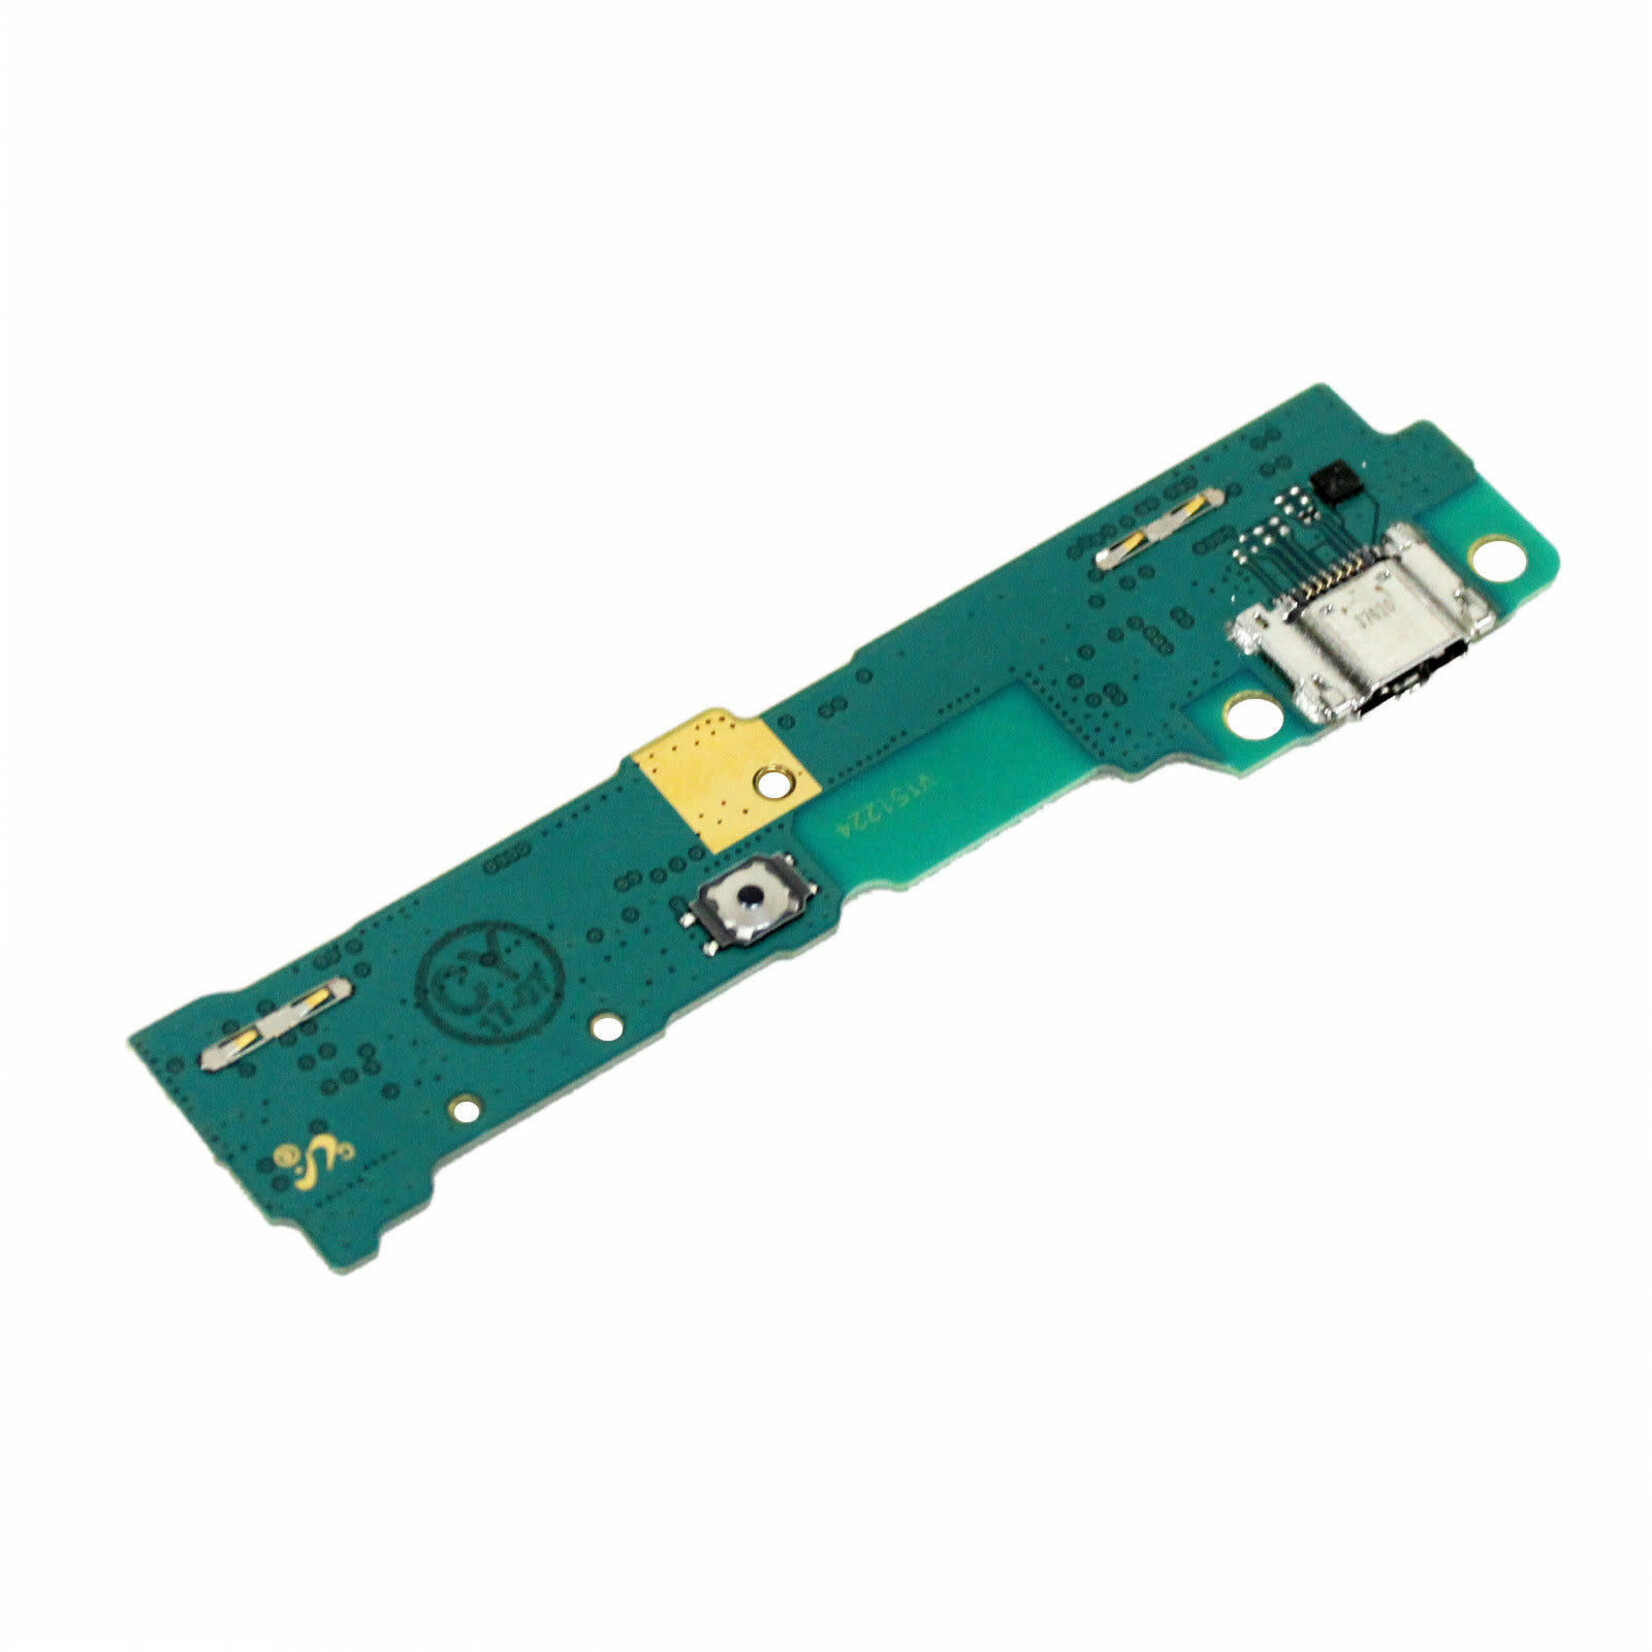 Samsung CHARGING PORT ASSEMBLY FOR SAMSUNG TAB S2 9.7" SM-T810 T815